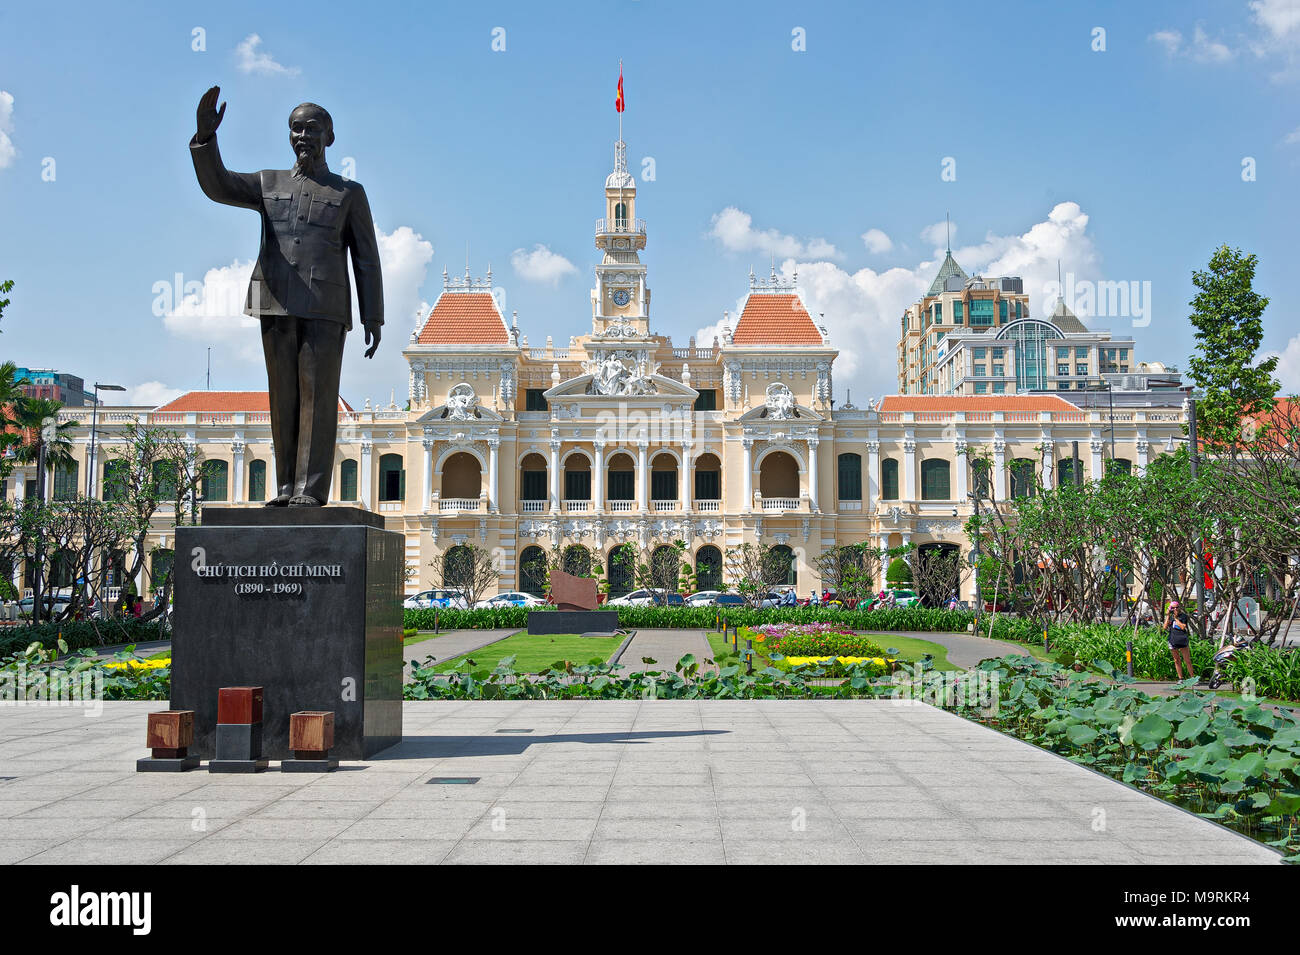 HO CHI MINH CITY, VIETNAM - APRIL 9, 2017: People's Committee Head office Stock Photo